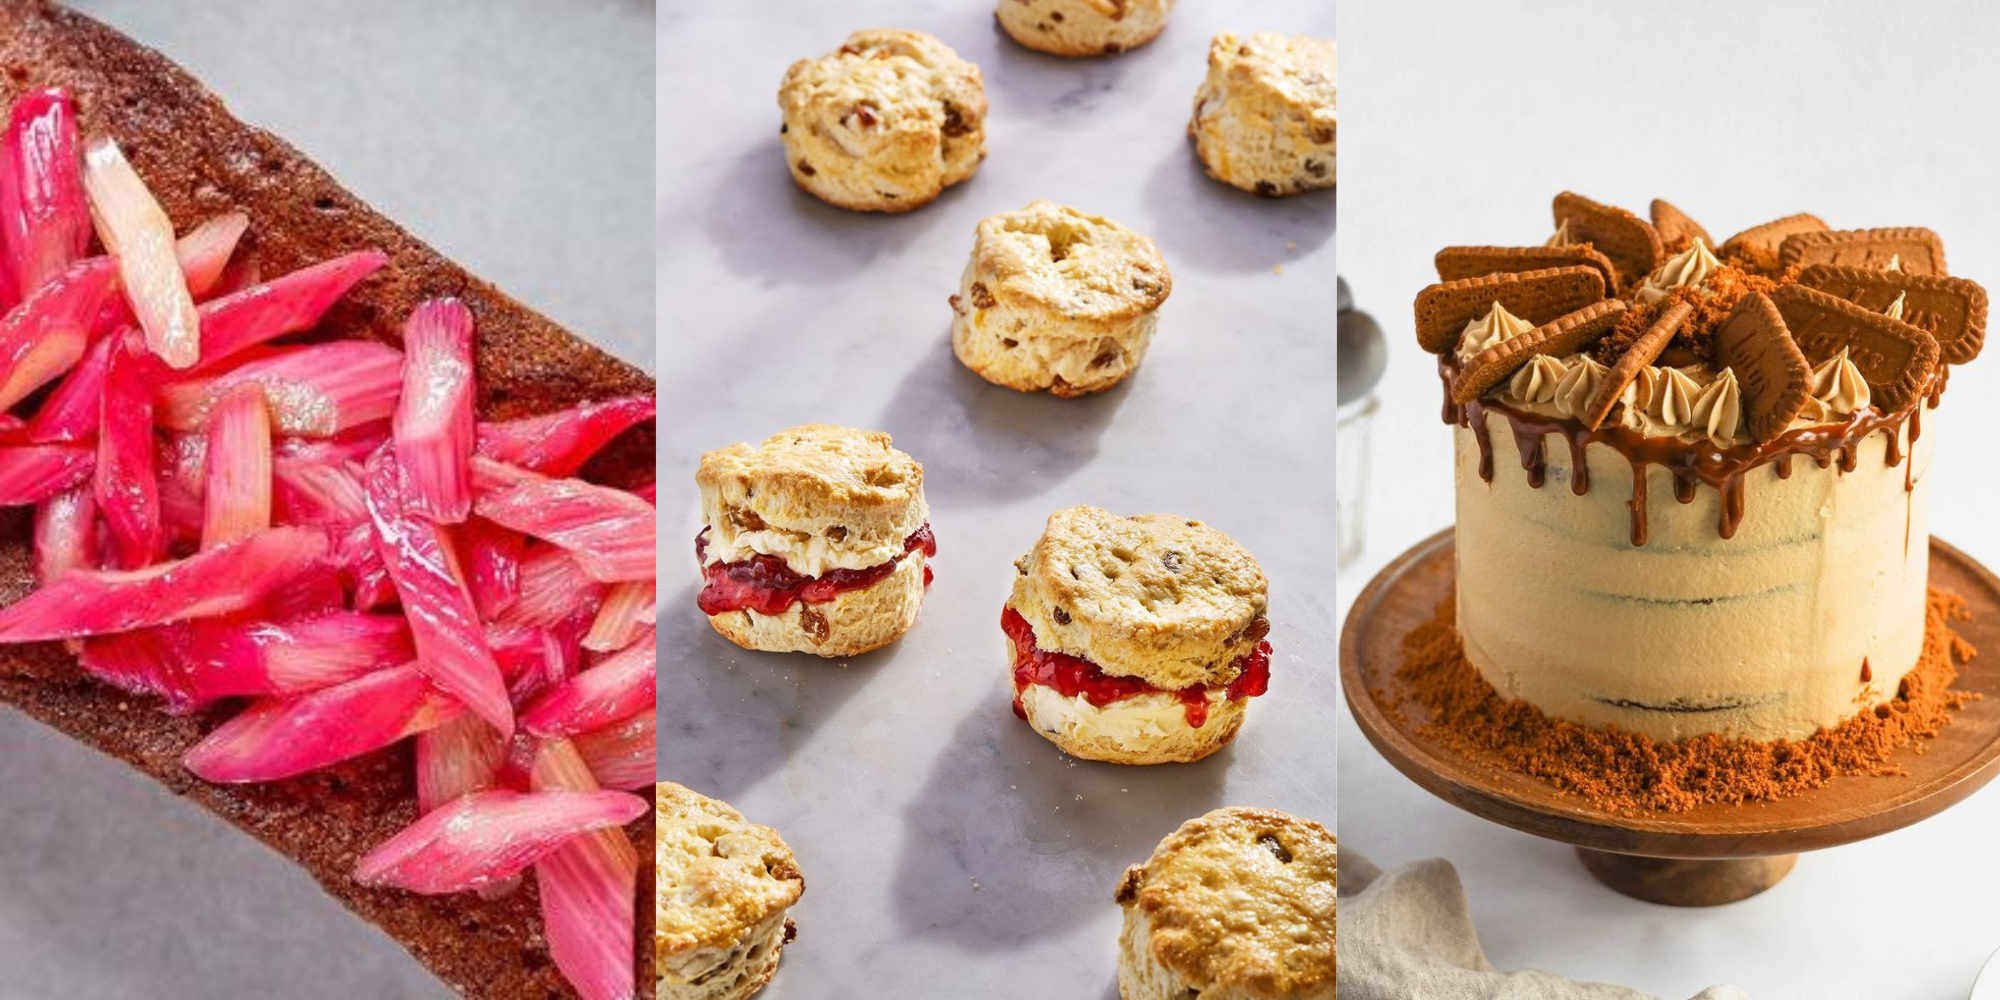 Mouthwatering afternoon tea recipes